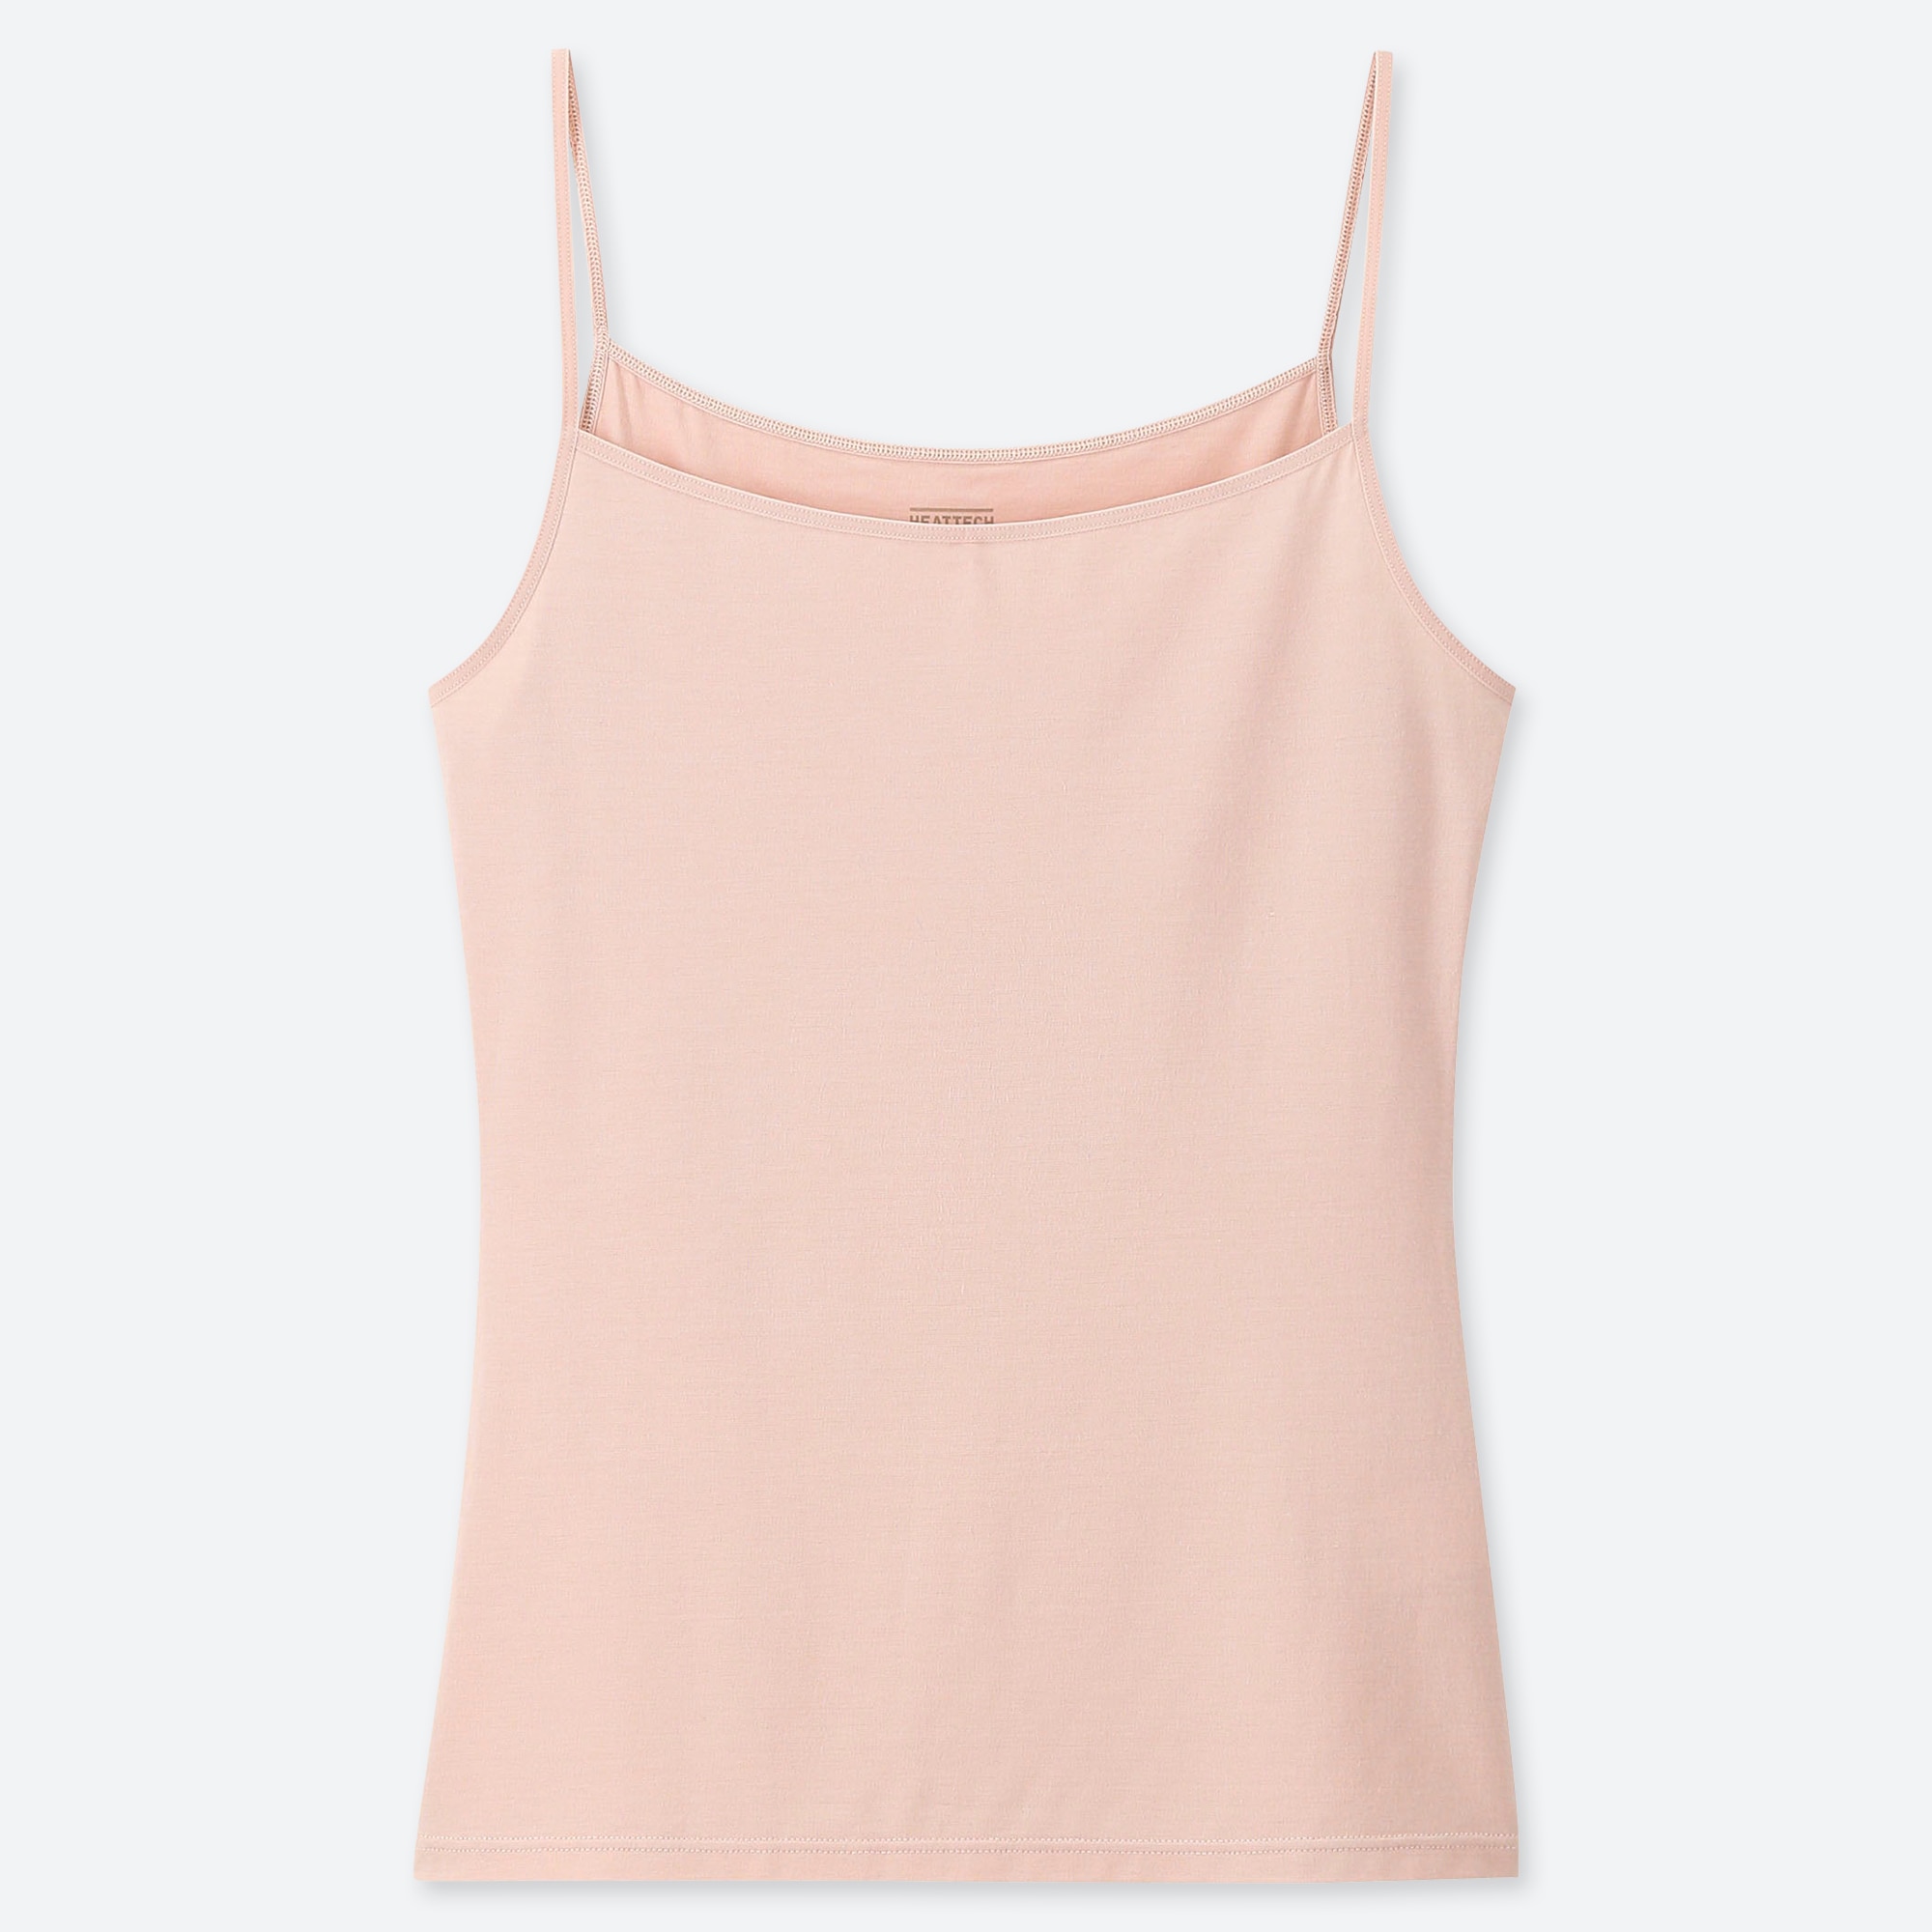 womens pink camisole